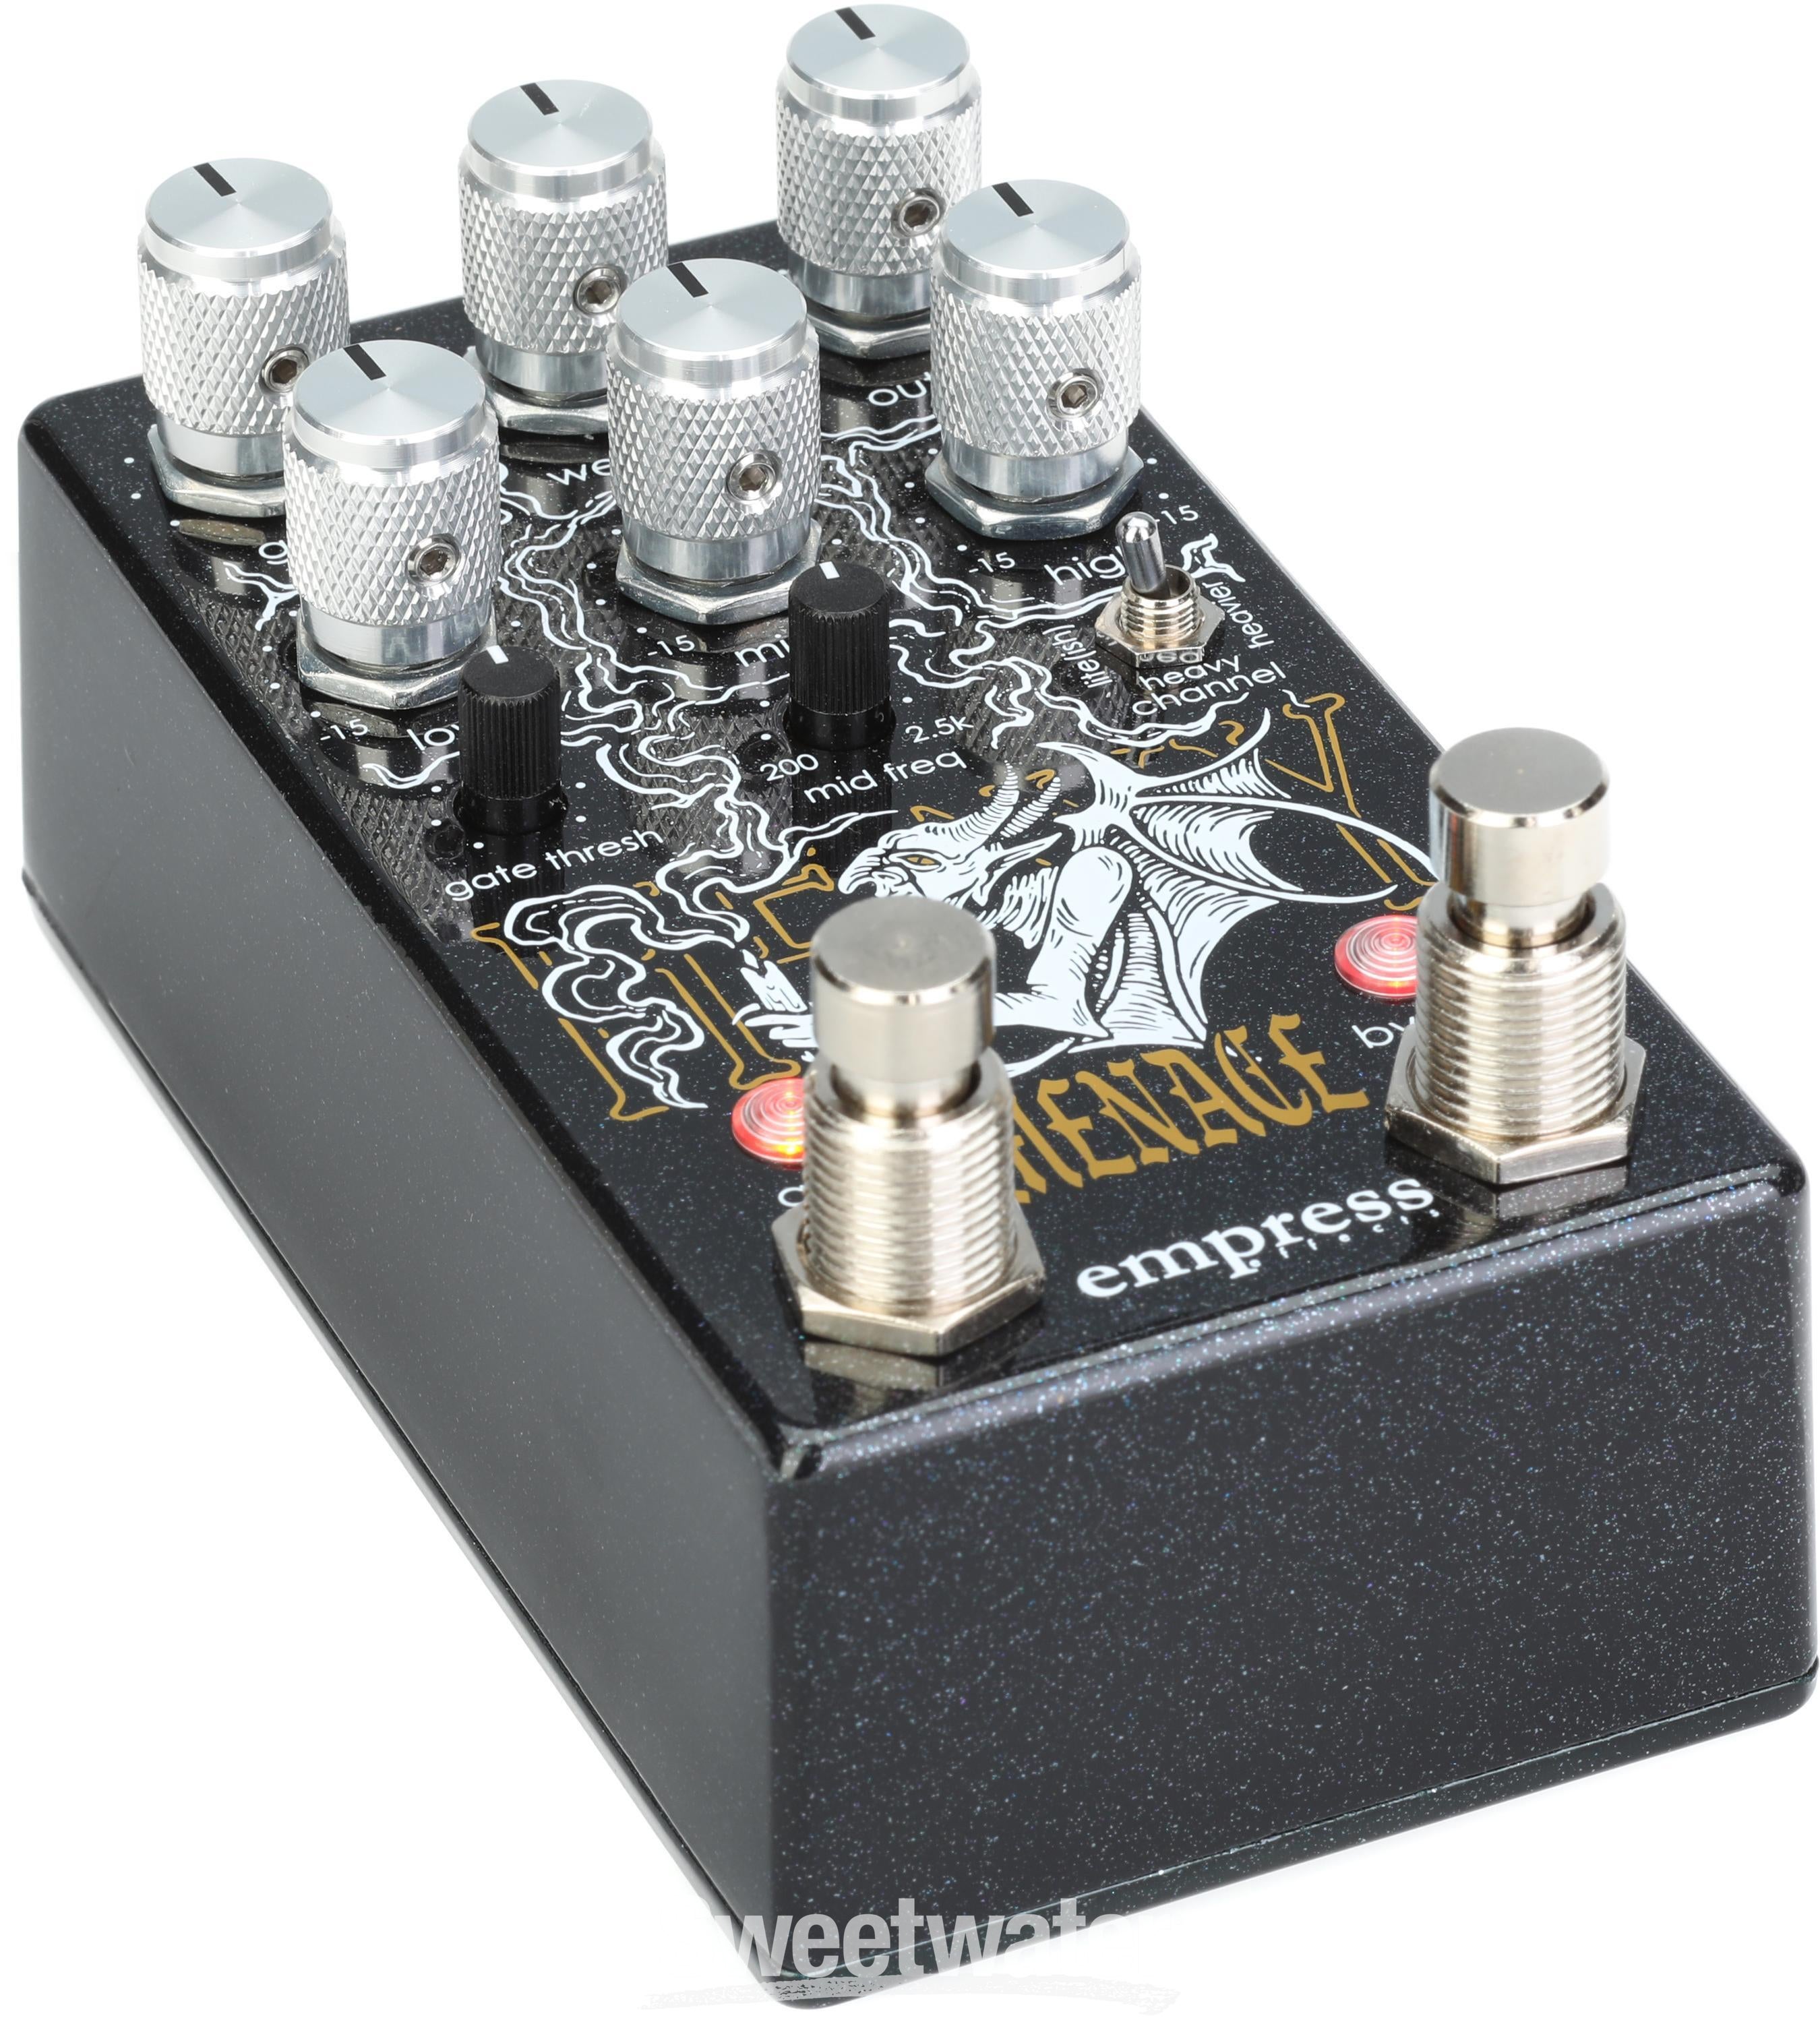 Empress Effects Heavy Menace Distortion Pedal Reviews | Sweetwater